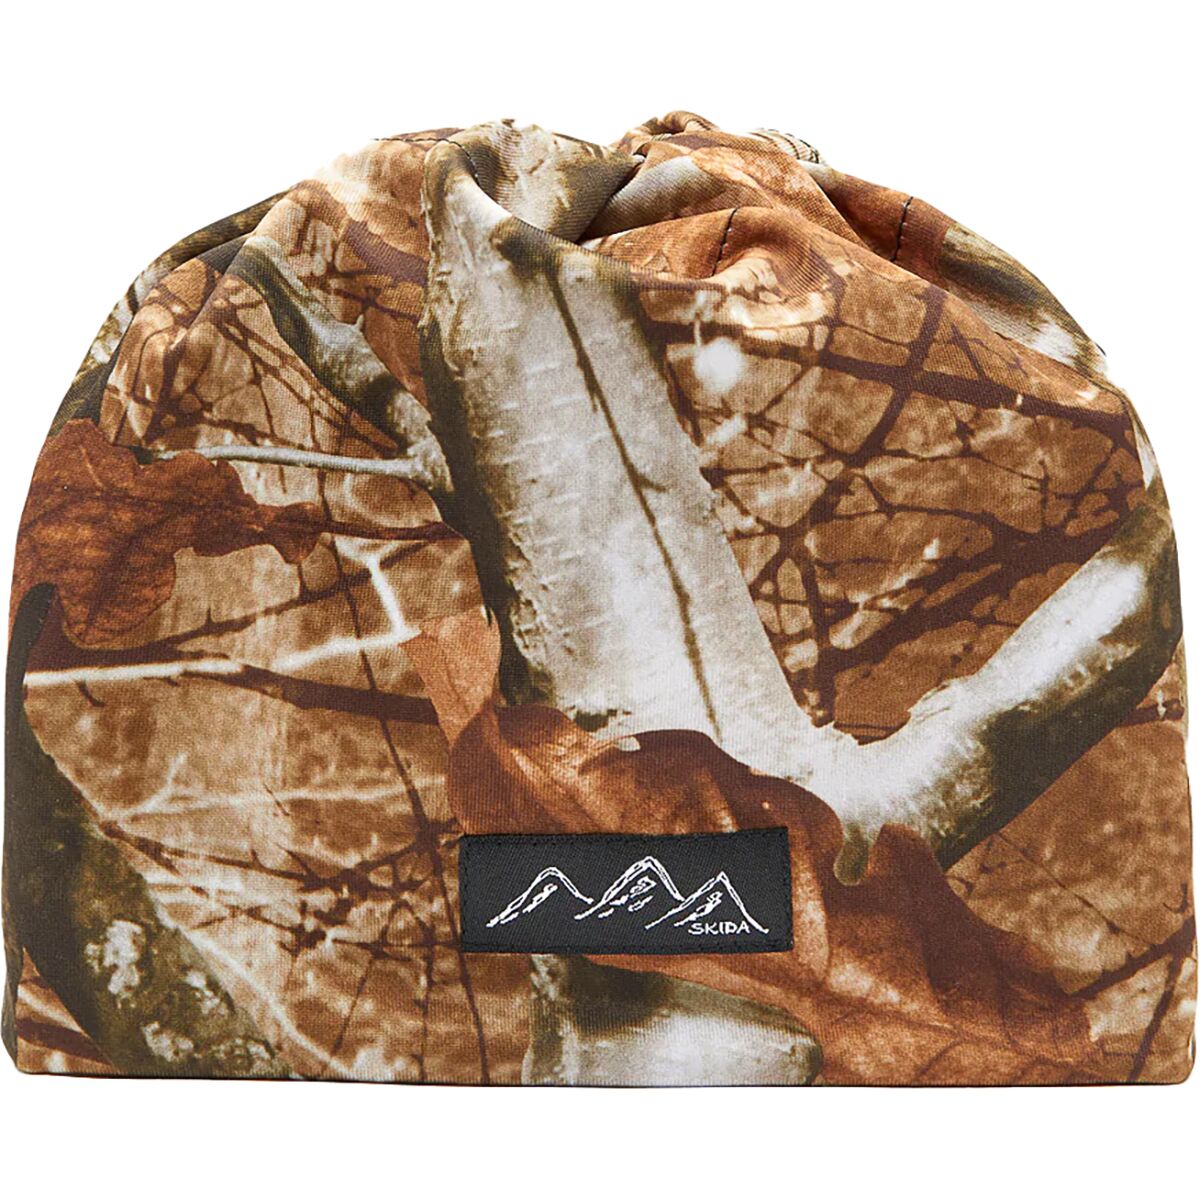 Skida Nordic Hat in True Timber - Size: S/M